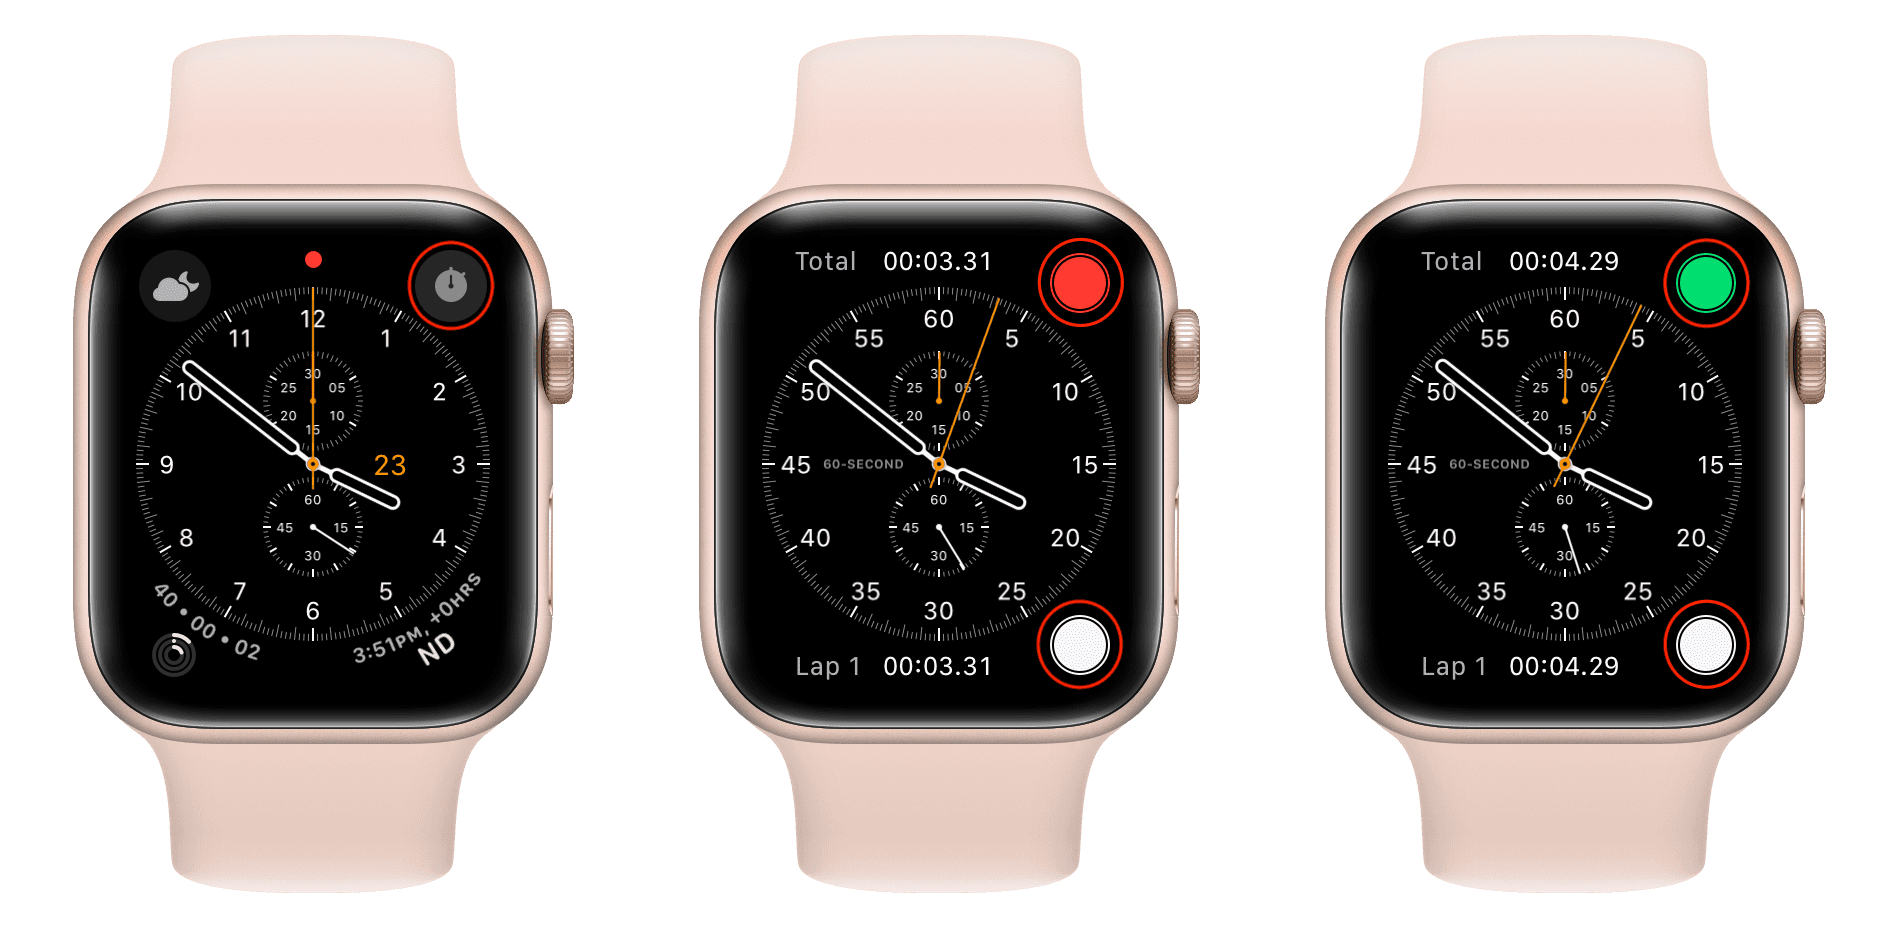 Chronograph watch face with stopwatch on Apple Watch